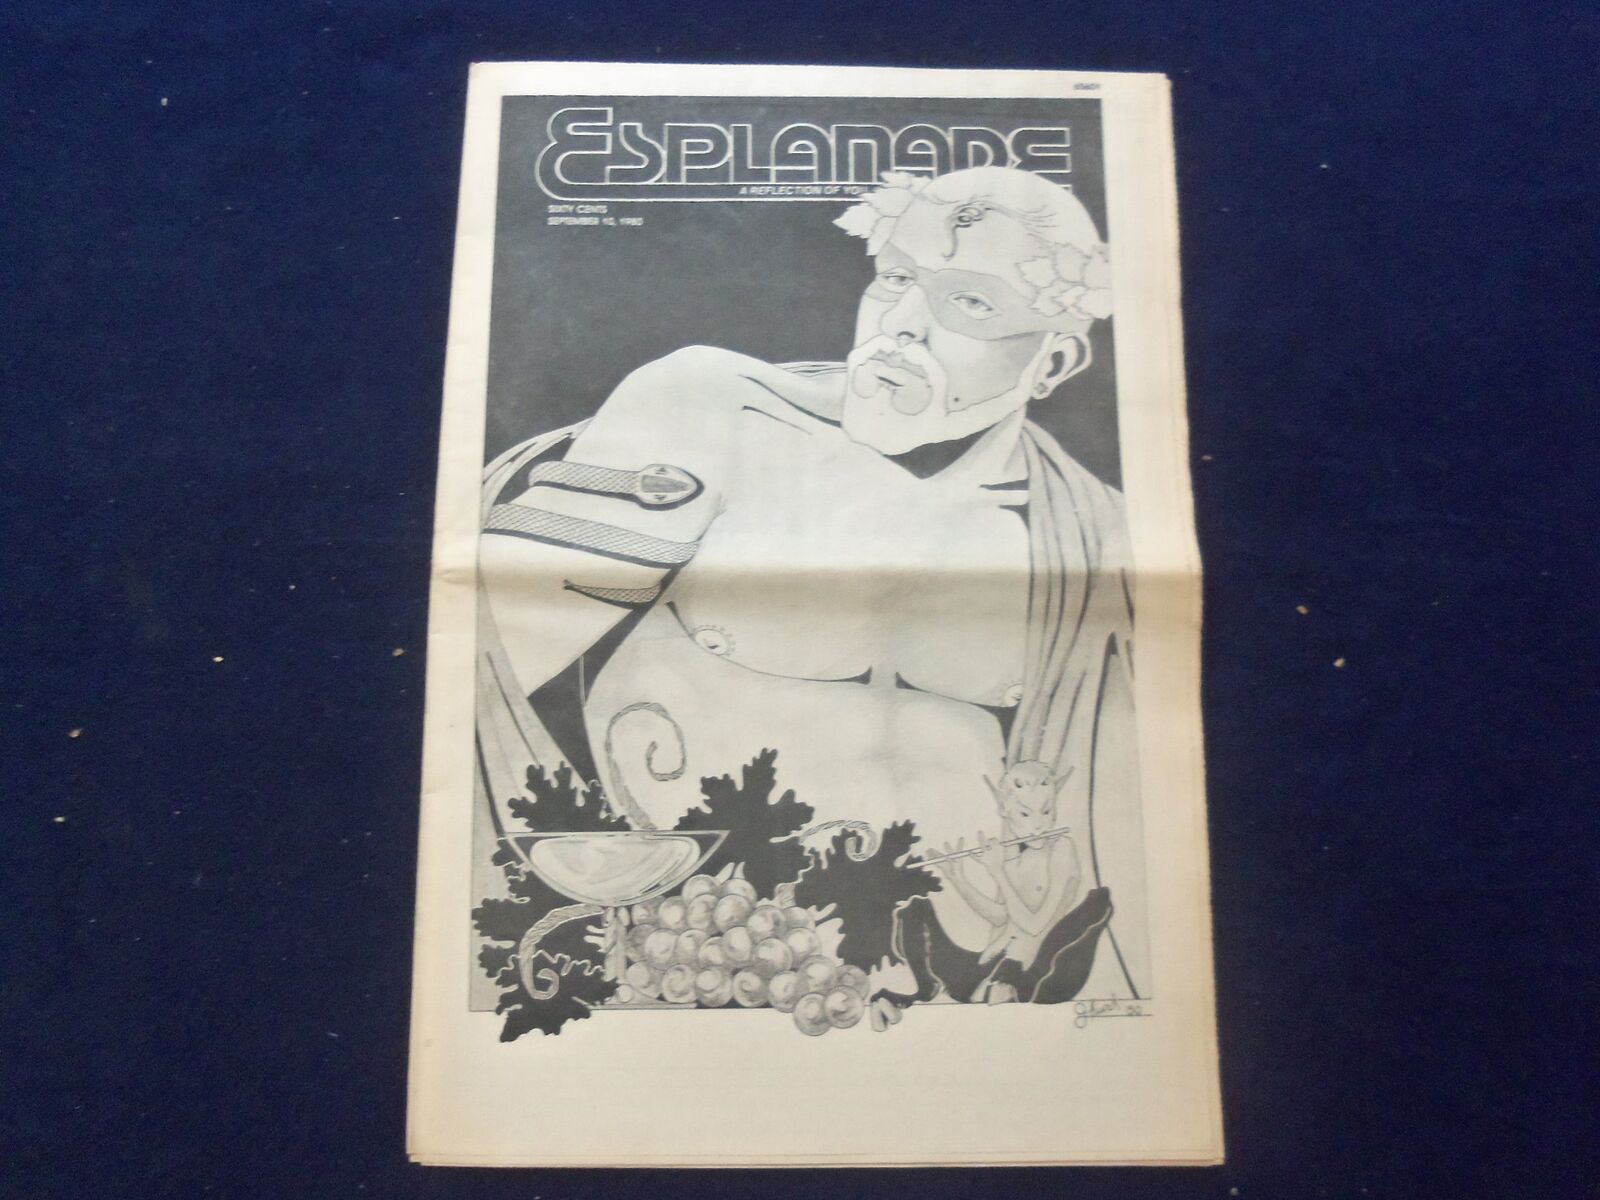 1980 SEPTEMBER 10 ESPLANADE NEWSPAPER - TO BE NOTED - FANCIFUL EROTICA - NP 6836